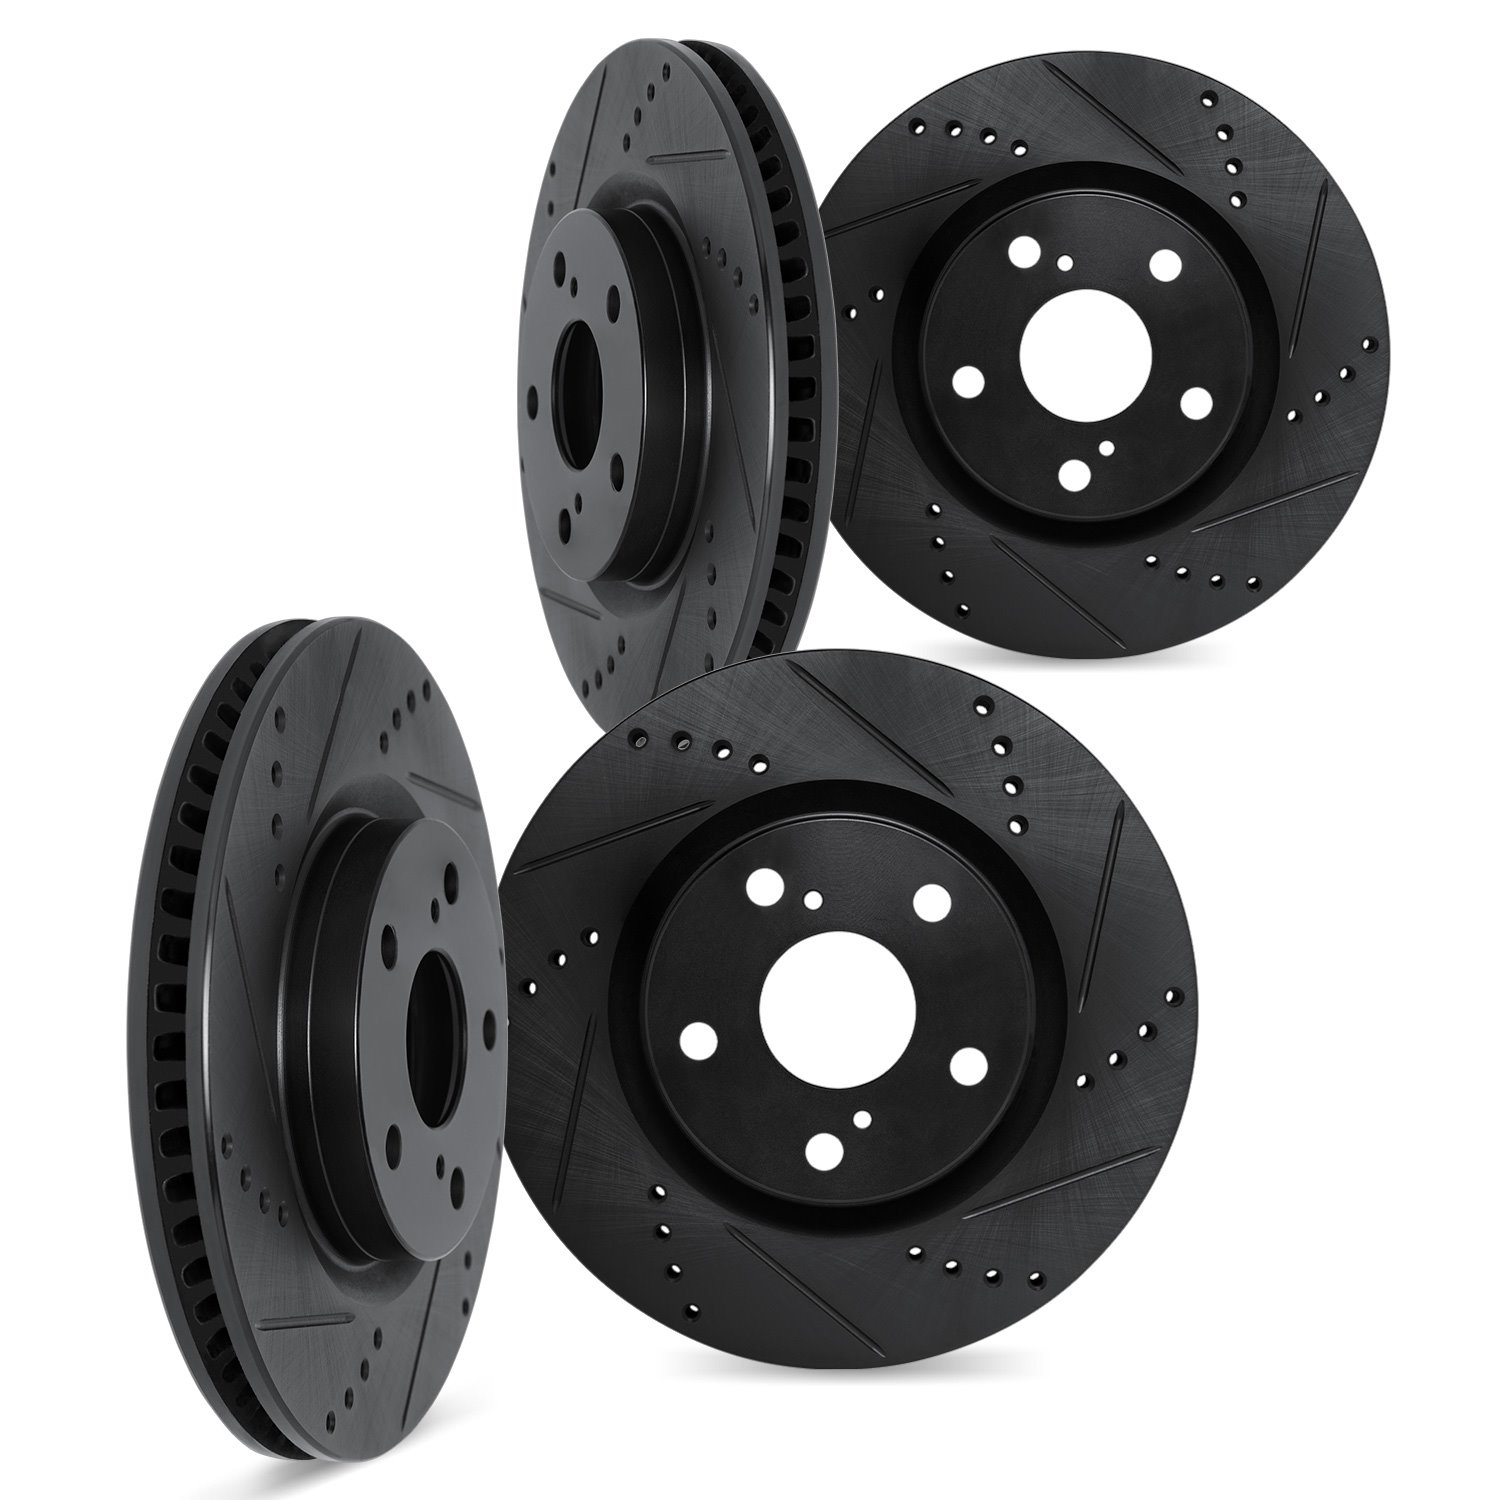 8004-75033 Drilled/Slotted Brake Rotors [Black], 1993-1998 Lexus/Toyota/Scion, Position: Front and Rear